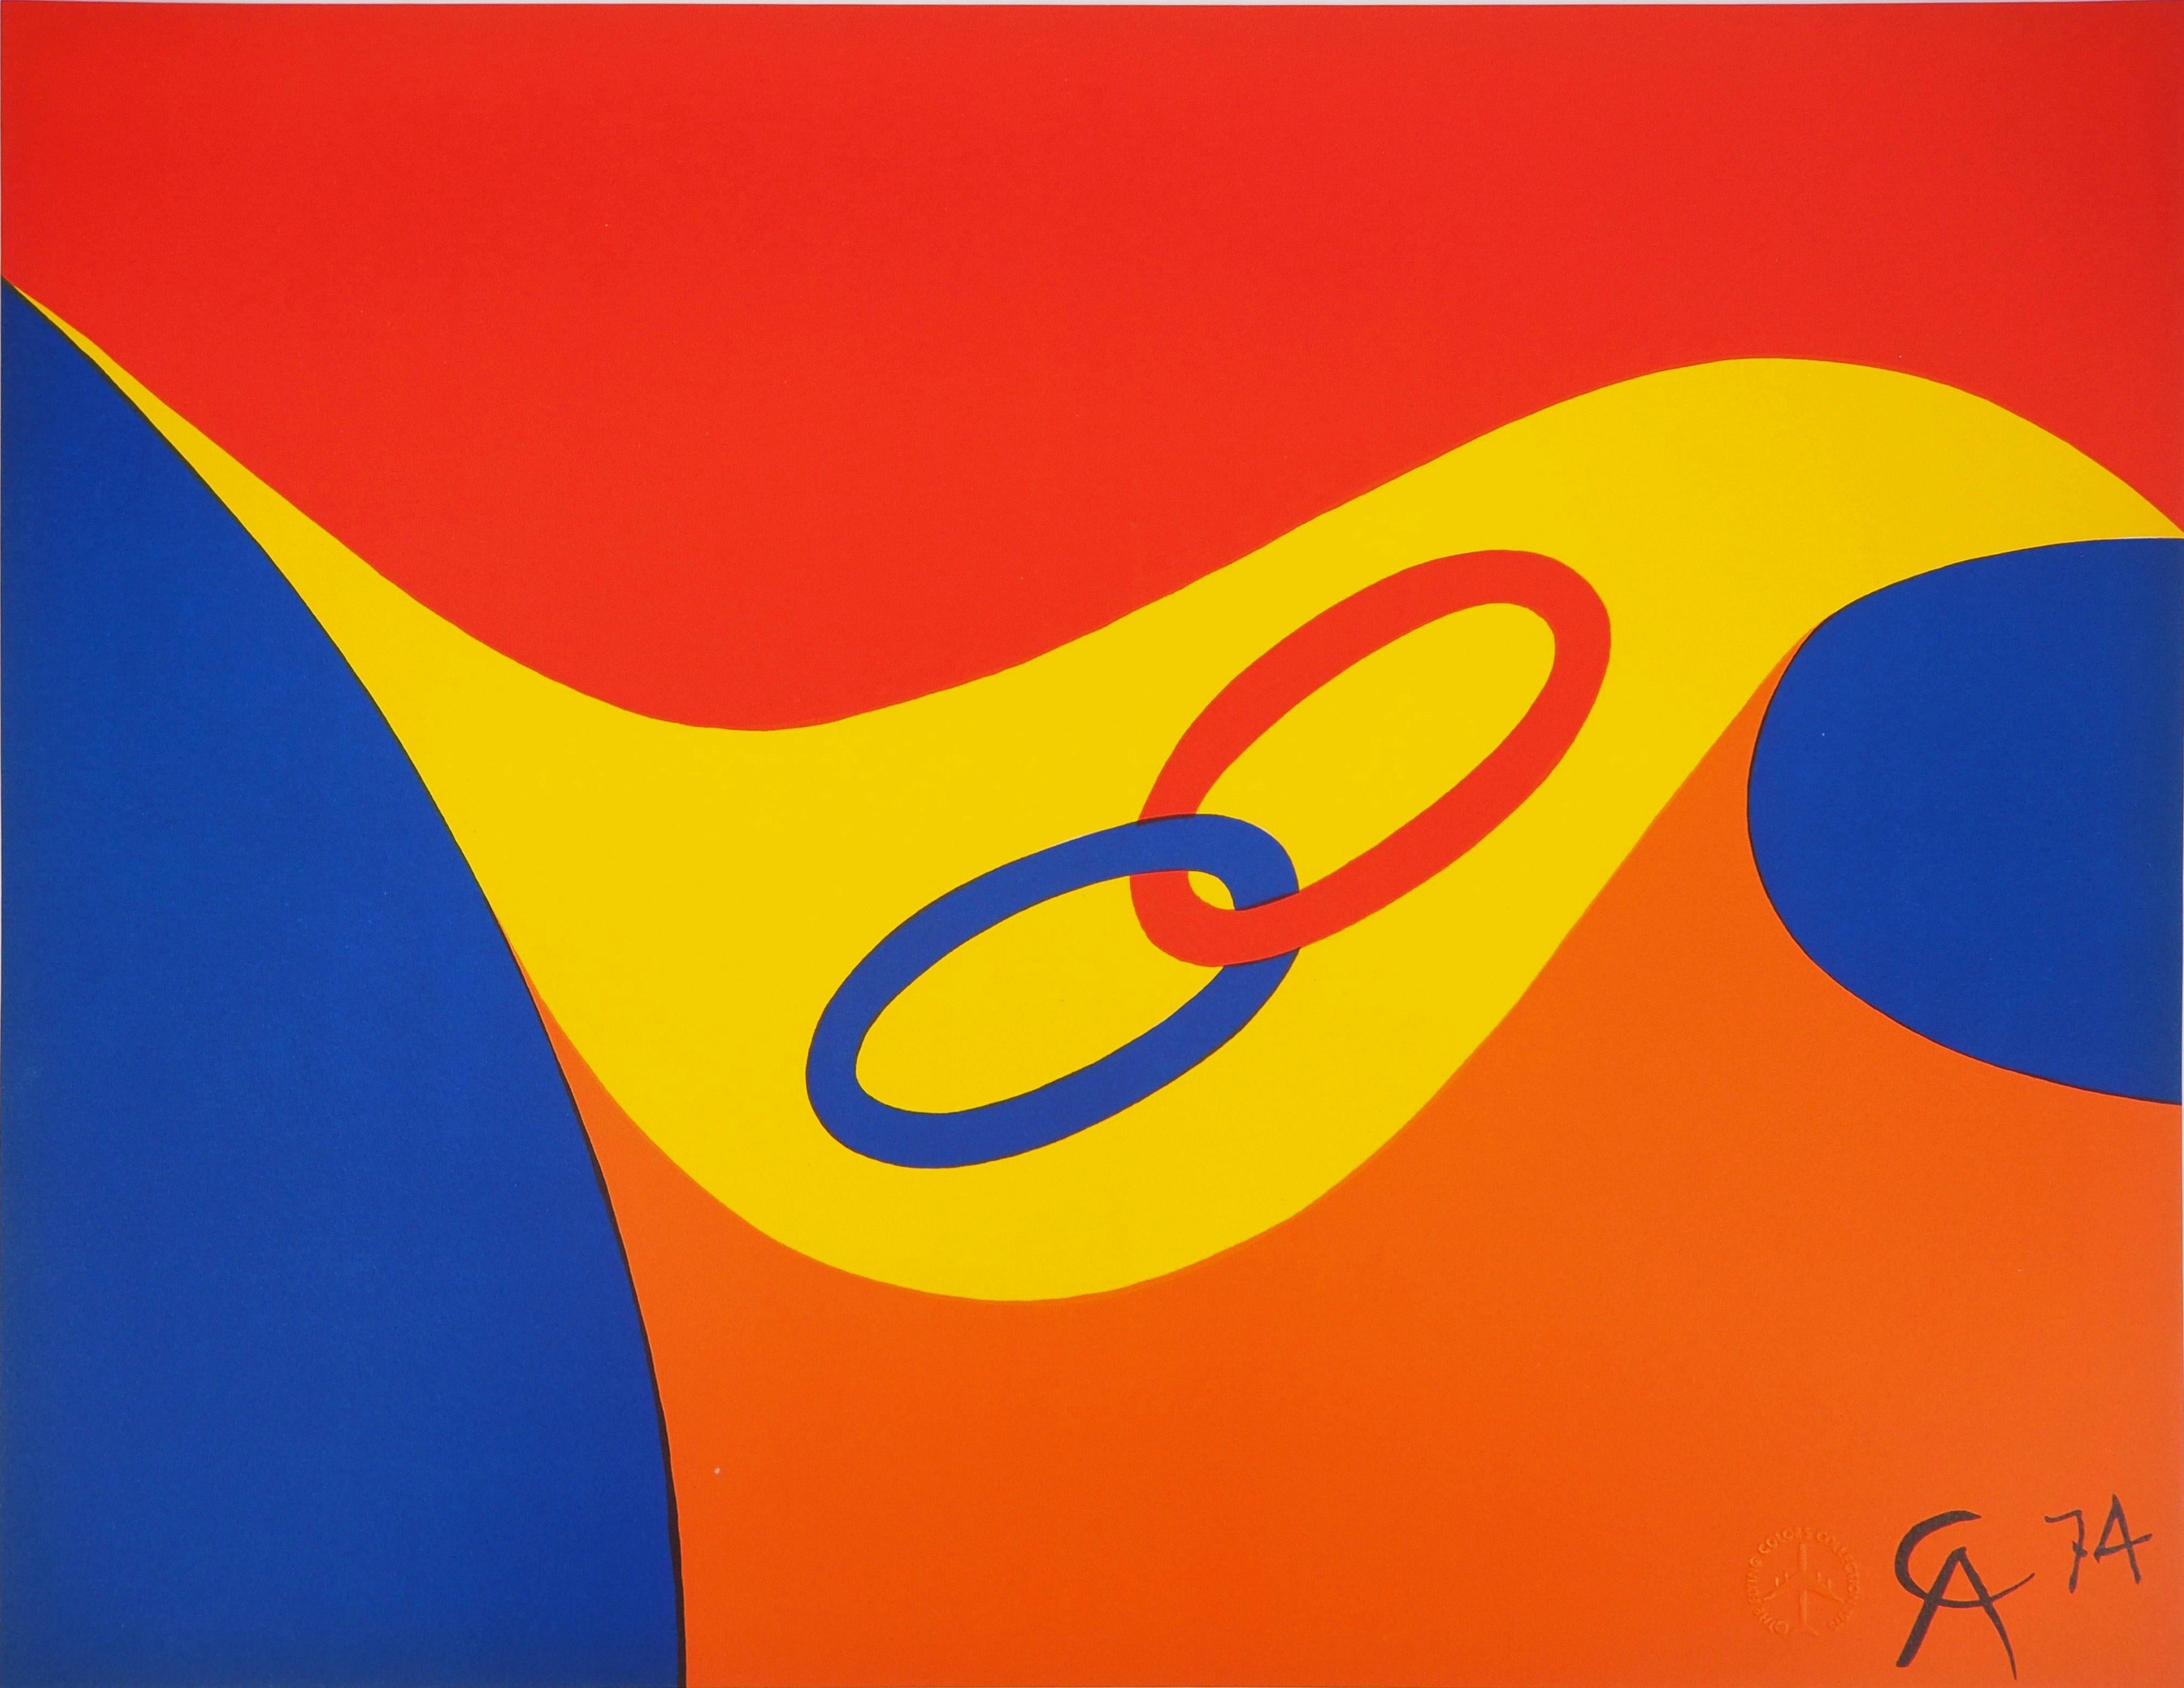 Alexander Calder Abstract Print - Flying Colors - Rings, 1974 - Original lithograph, Signed